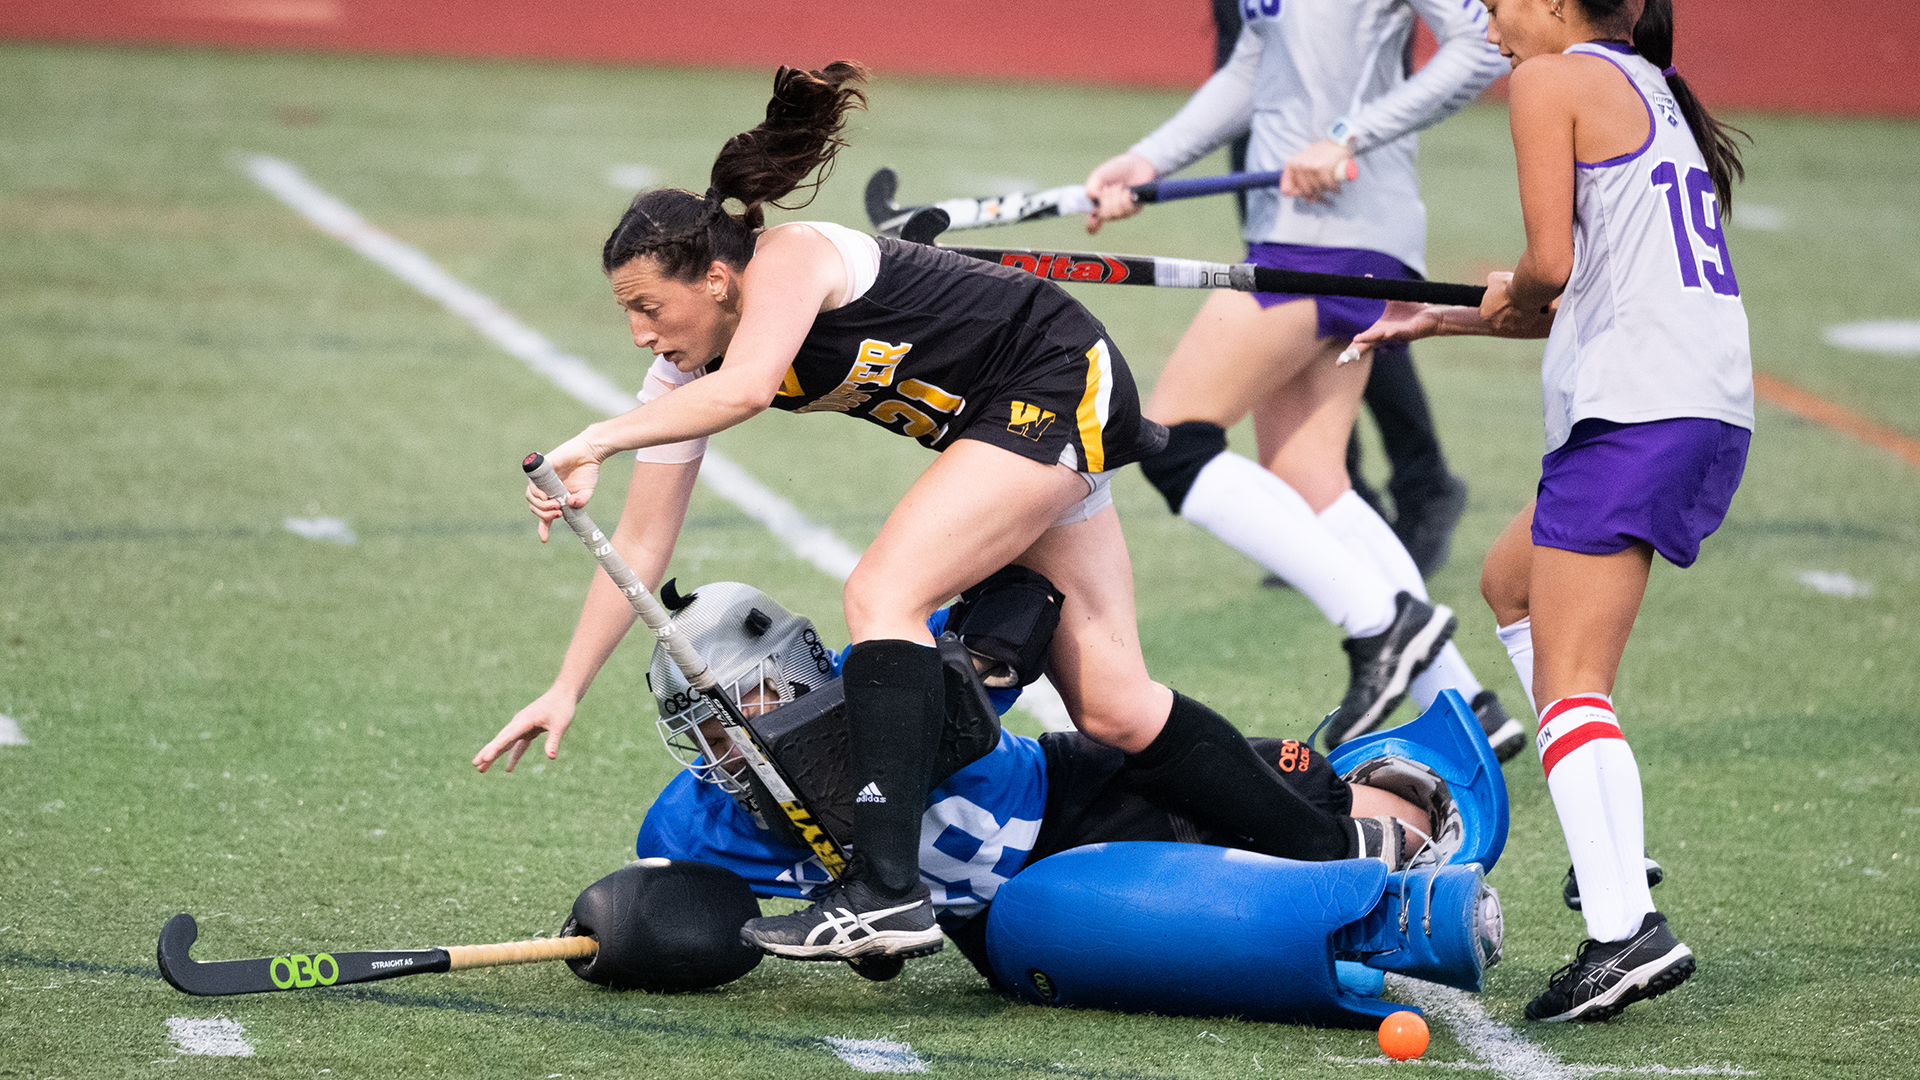 Katie Agatucci College of Wooster Field Hockey